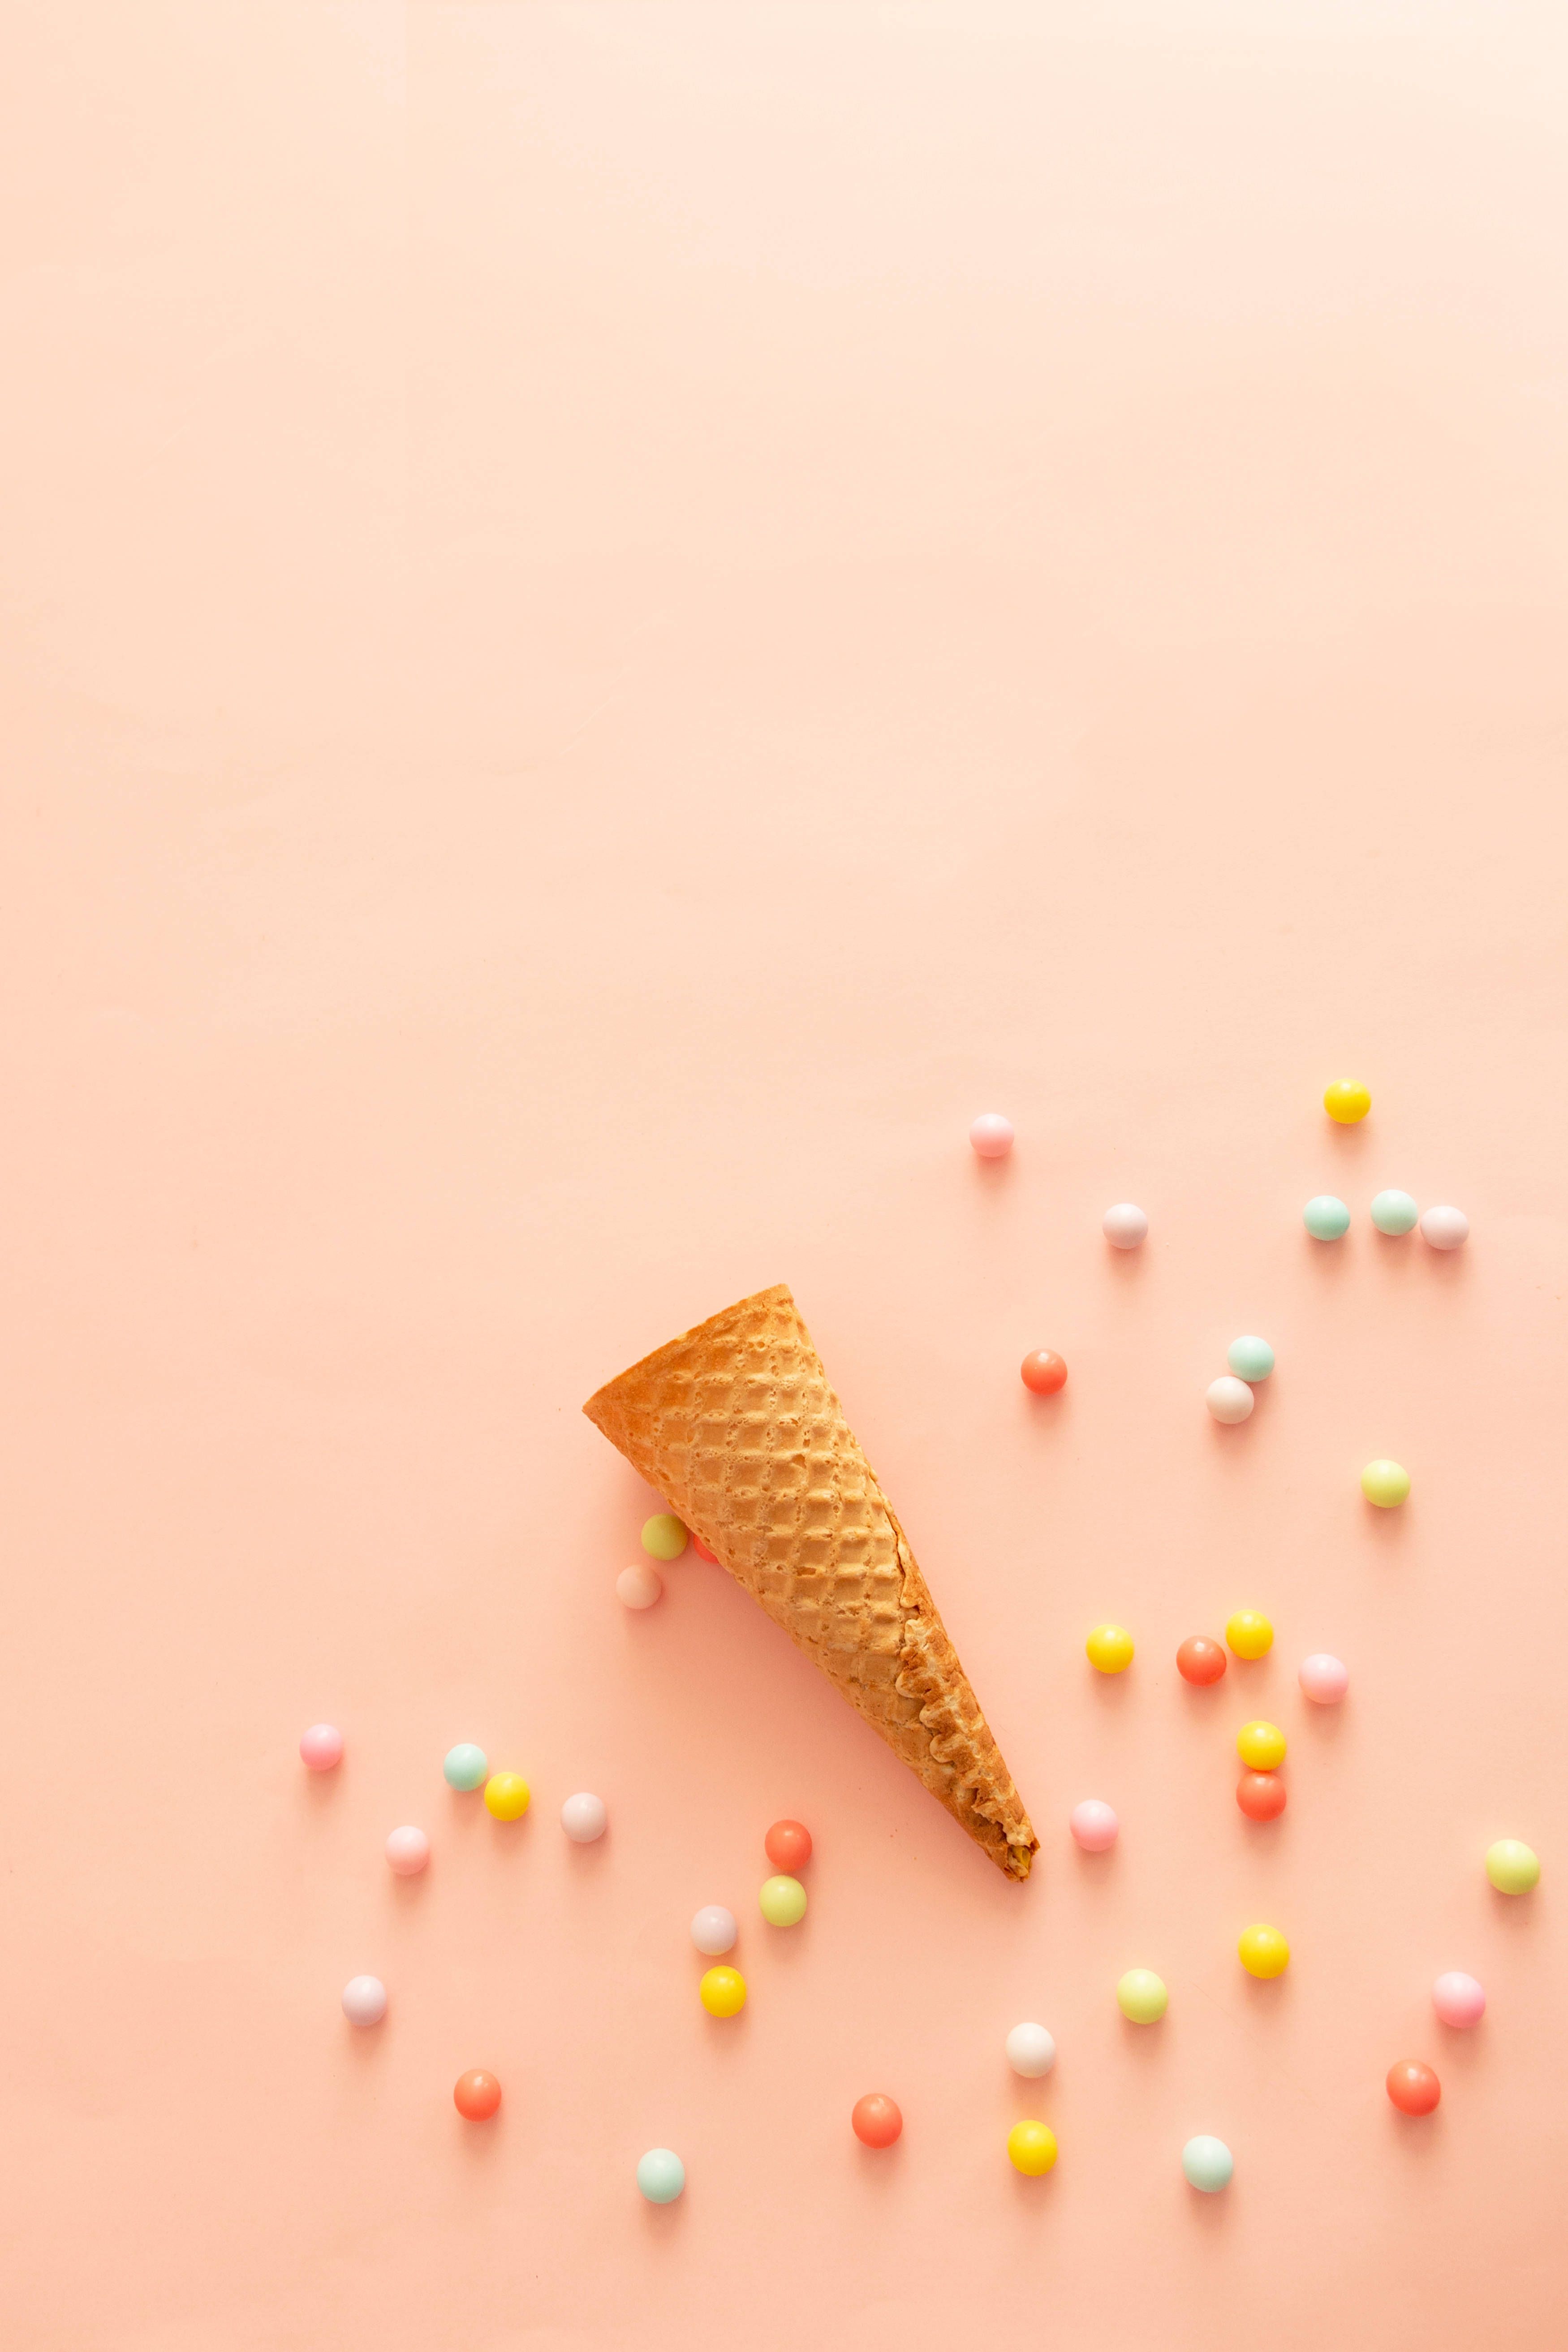 A waffle cone on a pink background with scattered candy. - Foodie